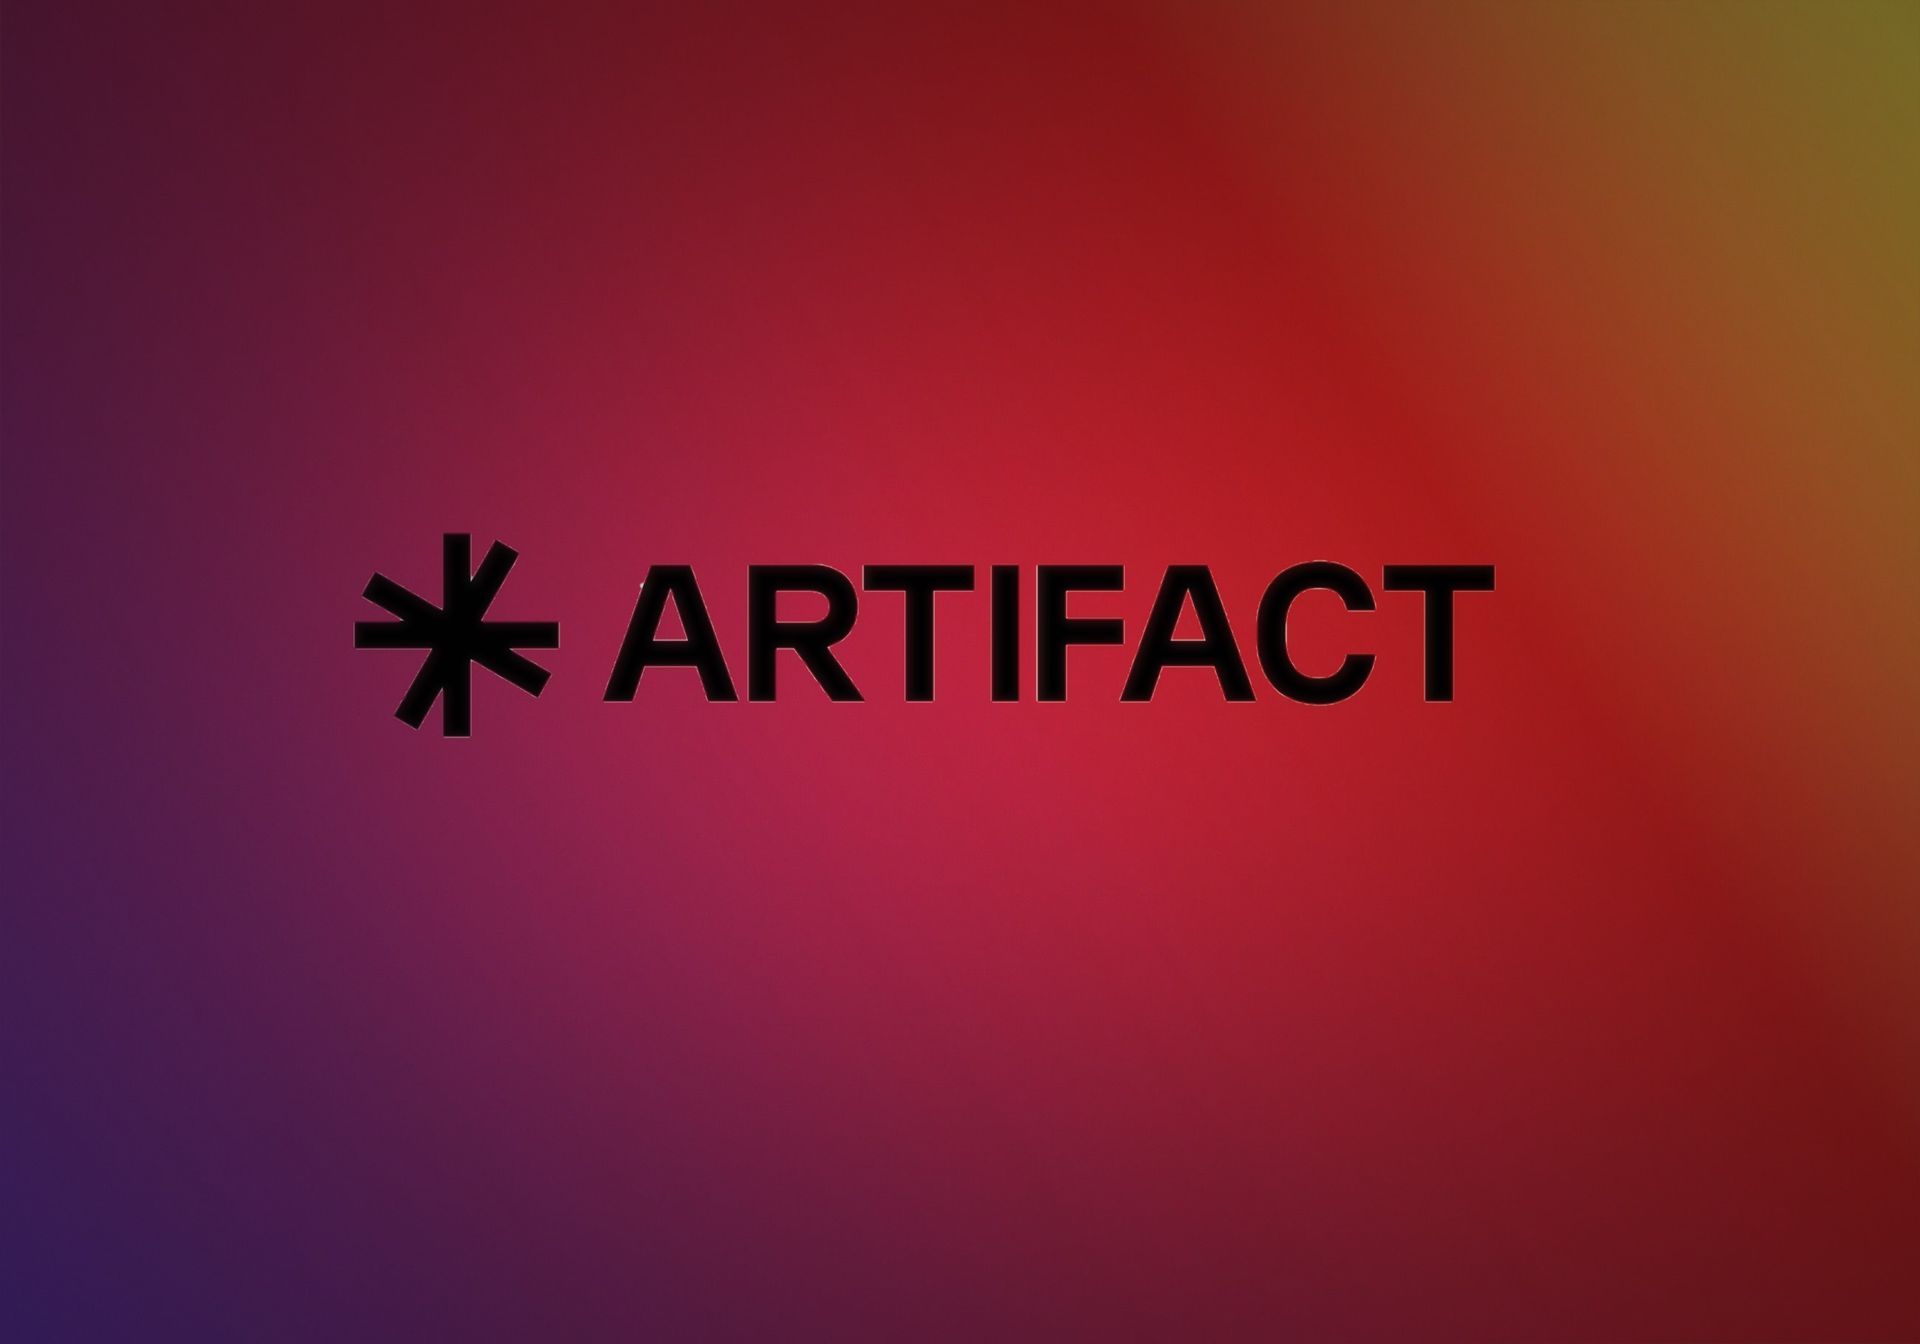 Artifact by Instagram founders